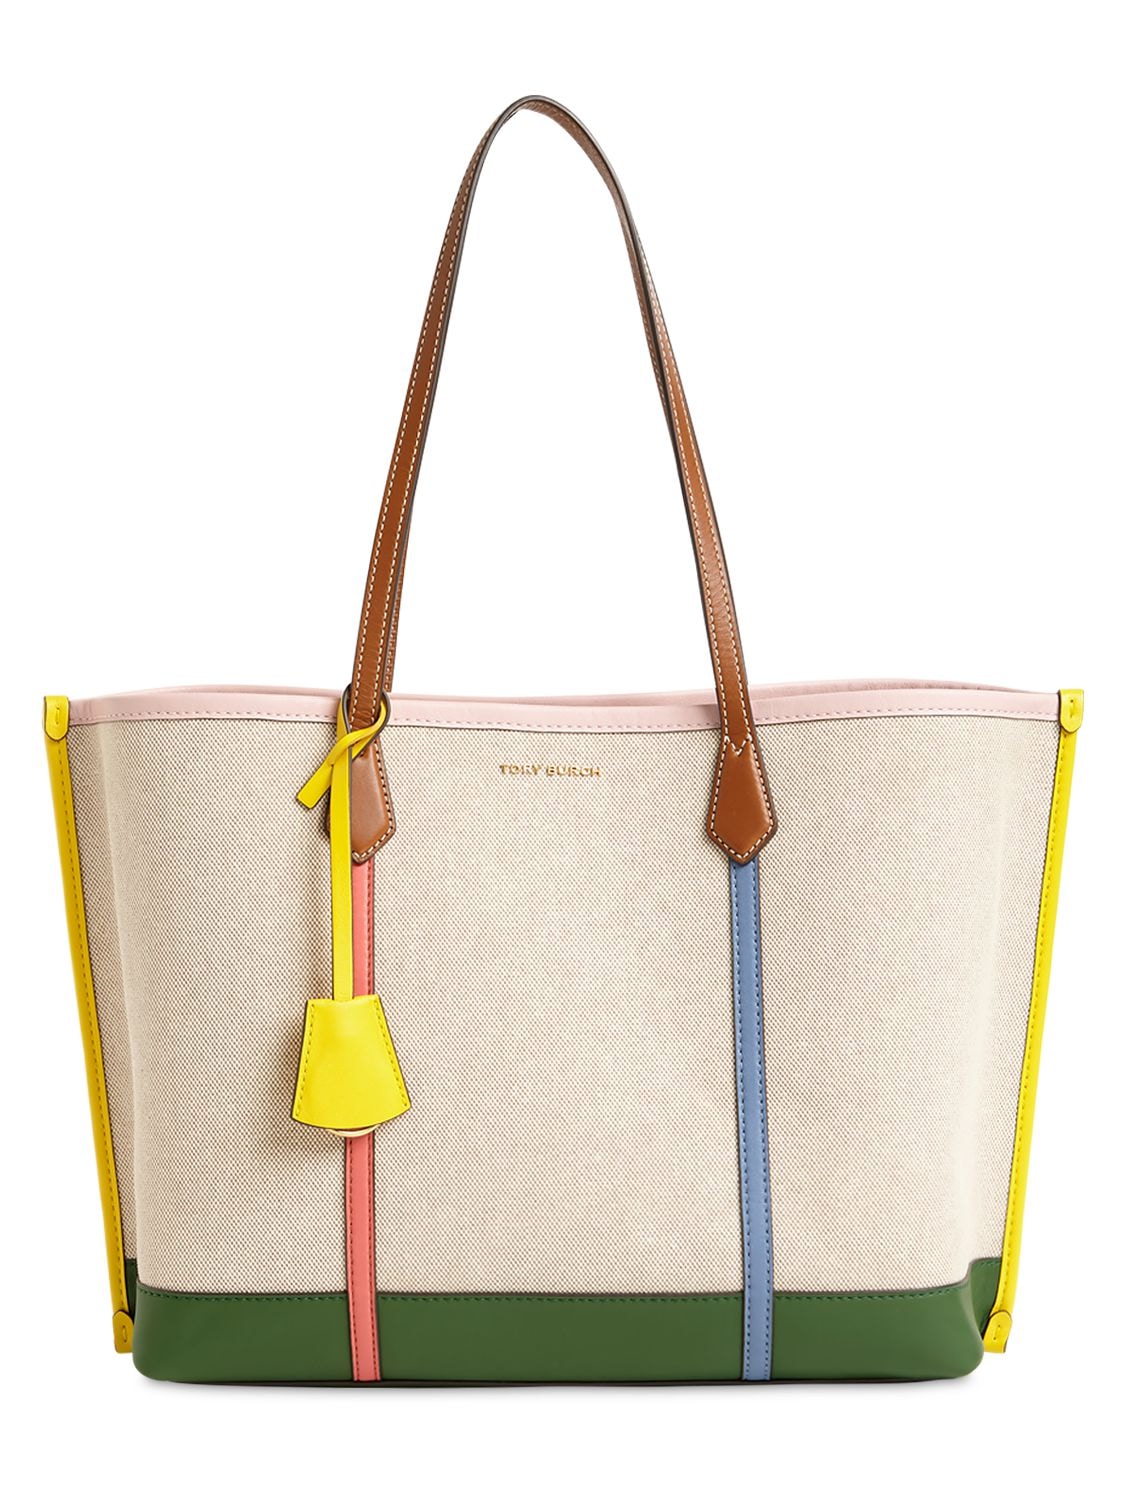 Tory Burch Perry Canvas Tote - Farfetch